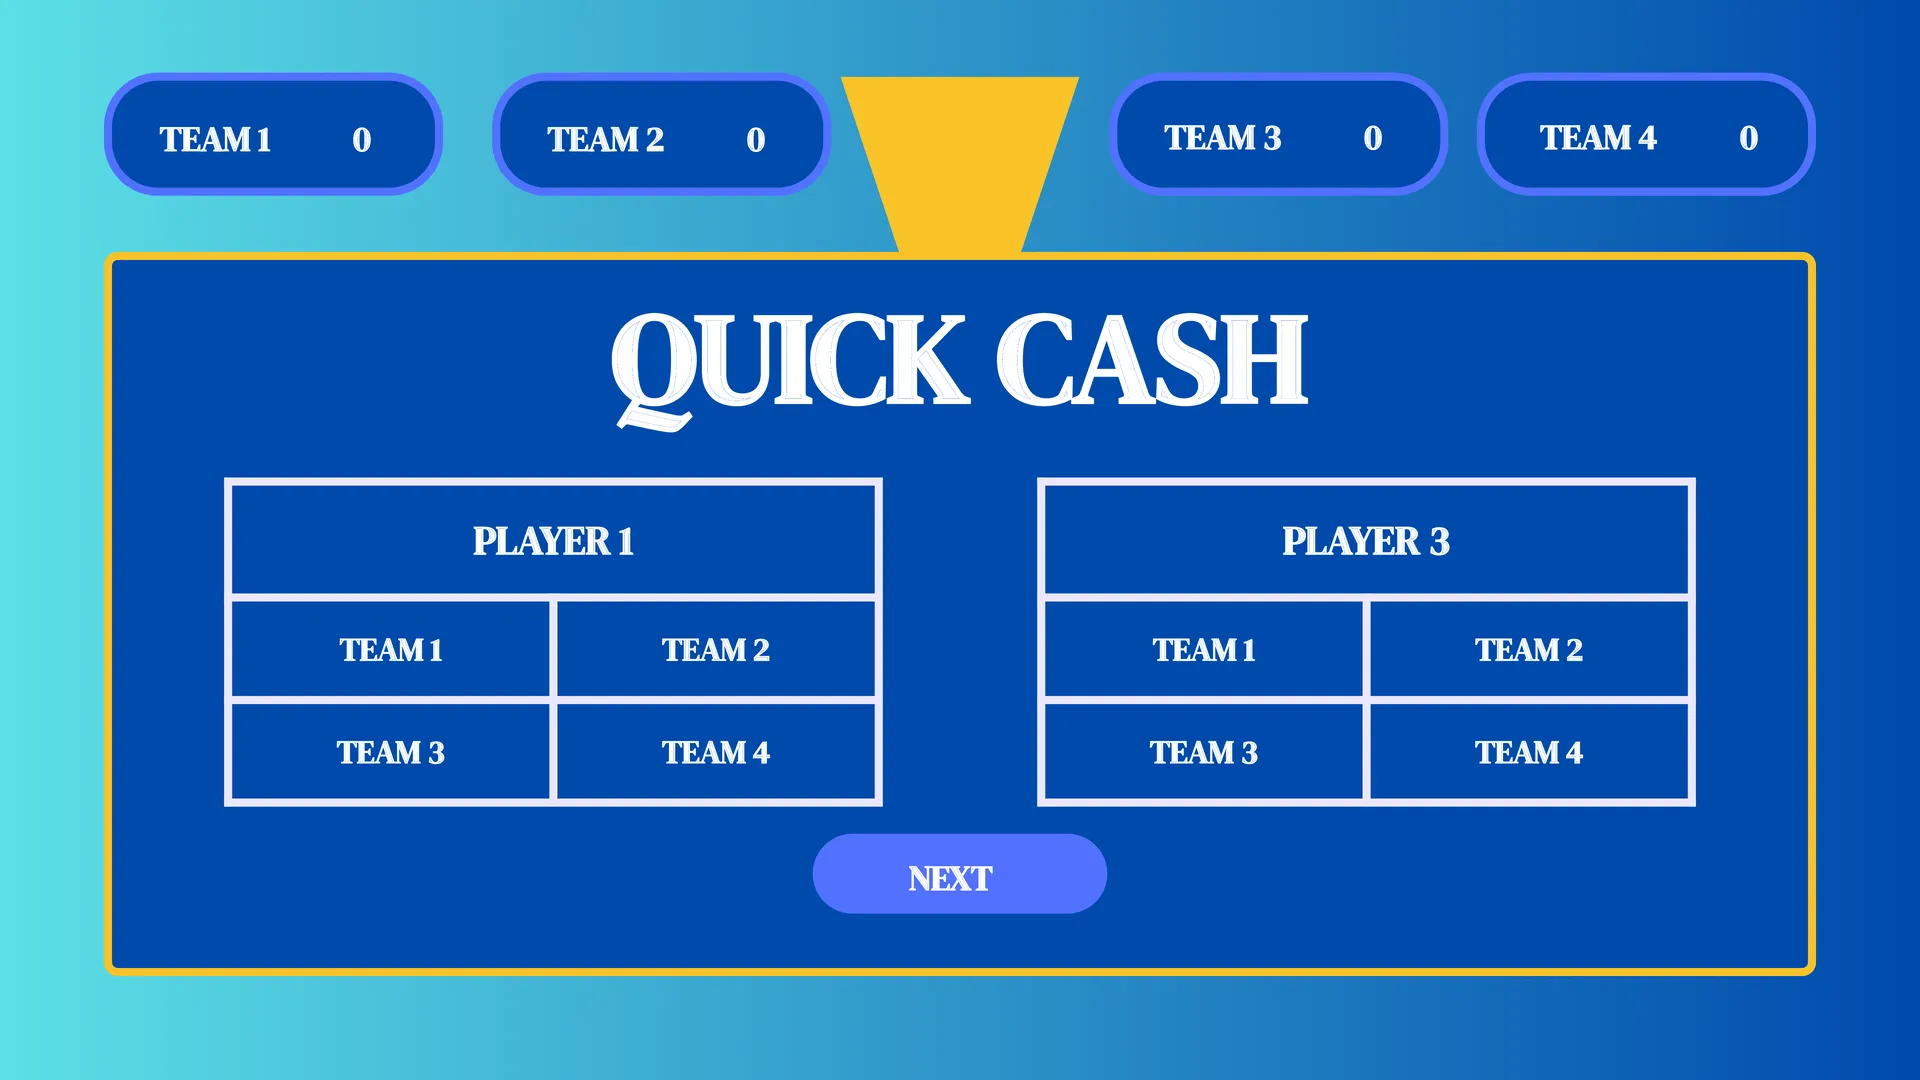 Family Feud Game Template for 4 Teams-4